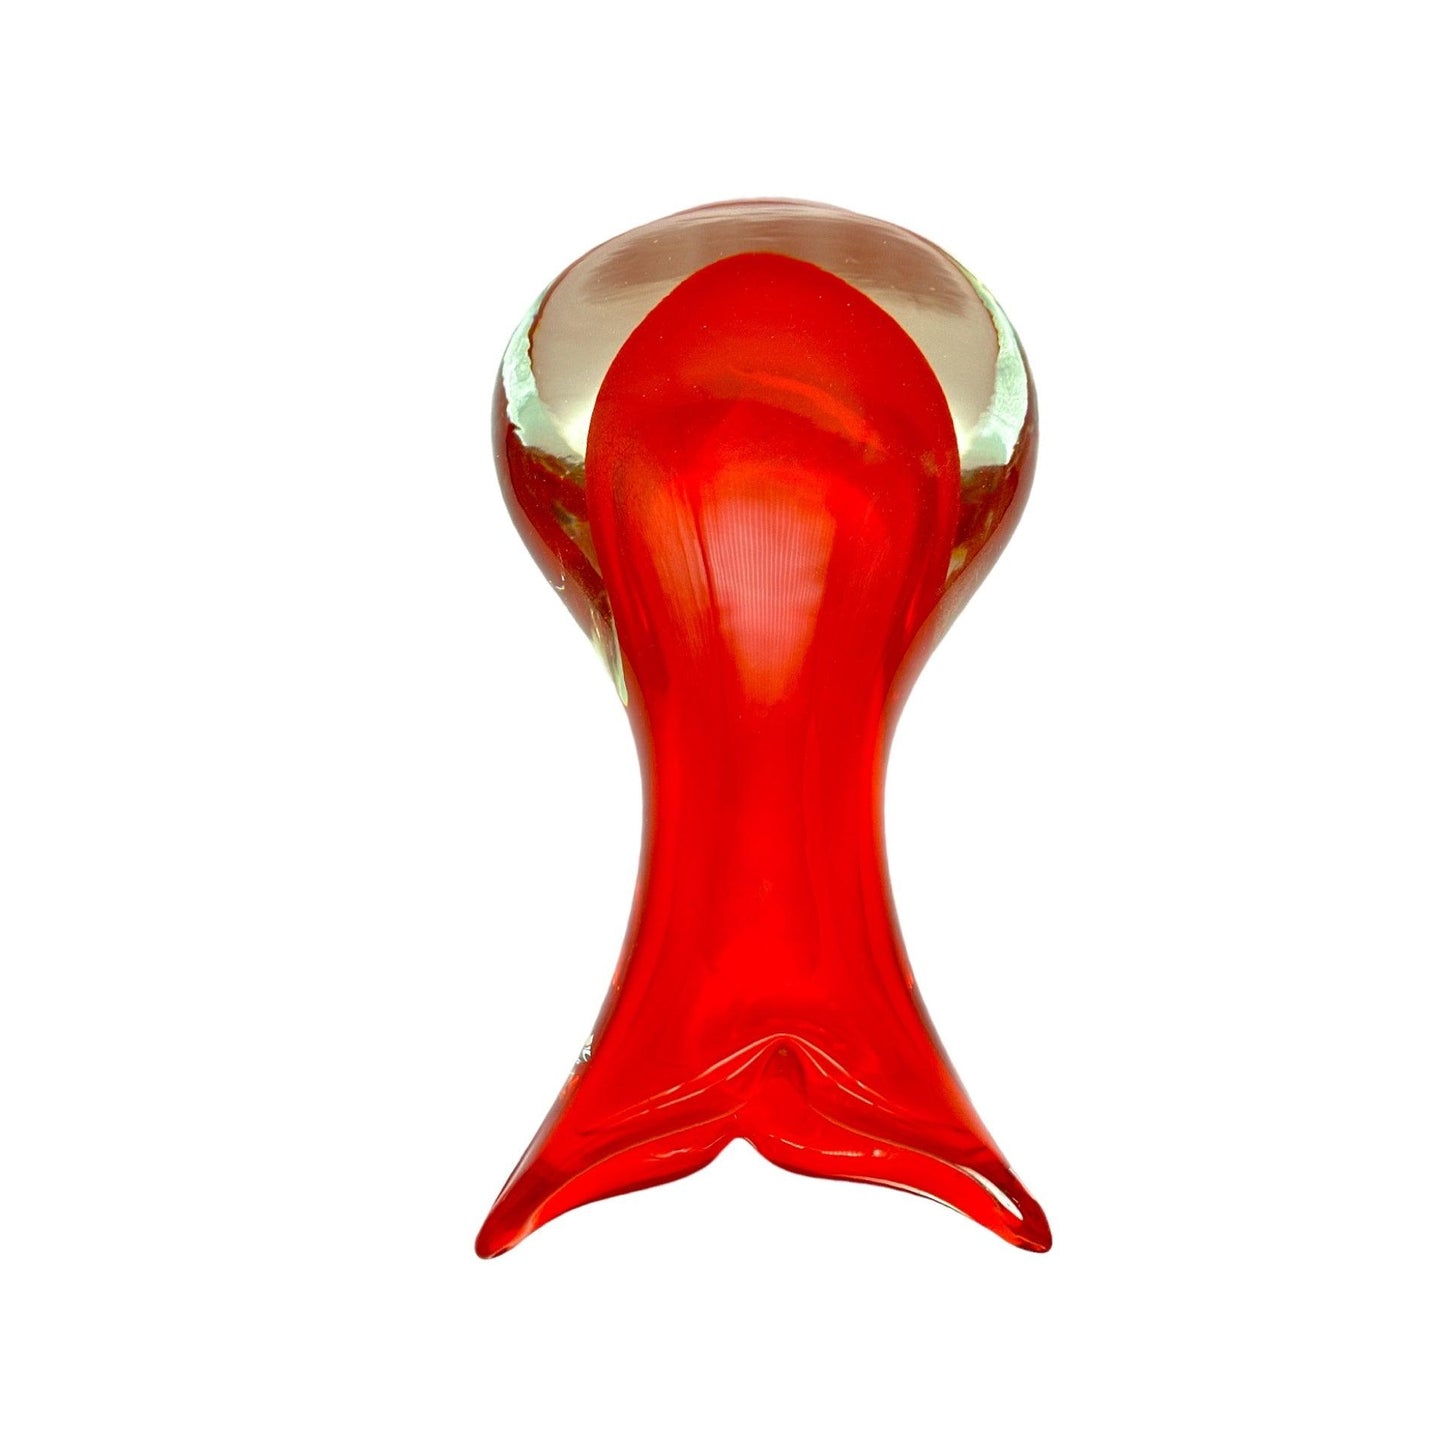 Elevate Your Home Decor with Murano Craftsmanship - Own a Vintage Murano Sommerso Art Glass Vase Today